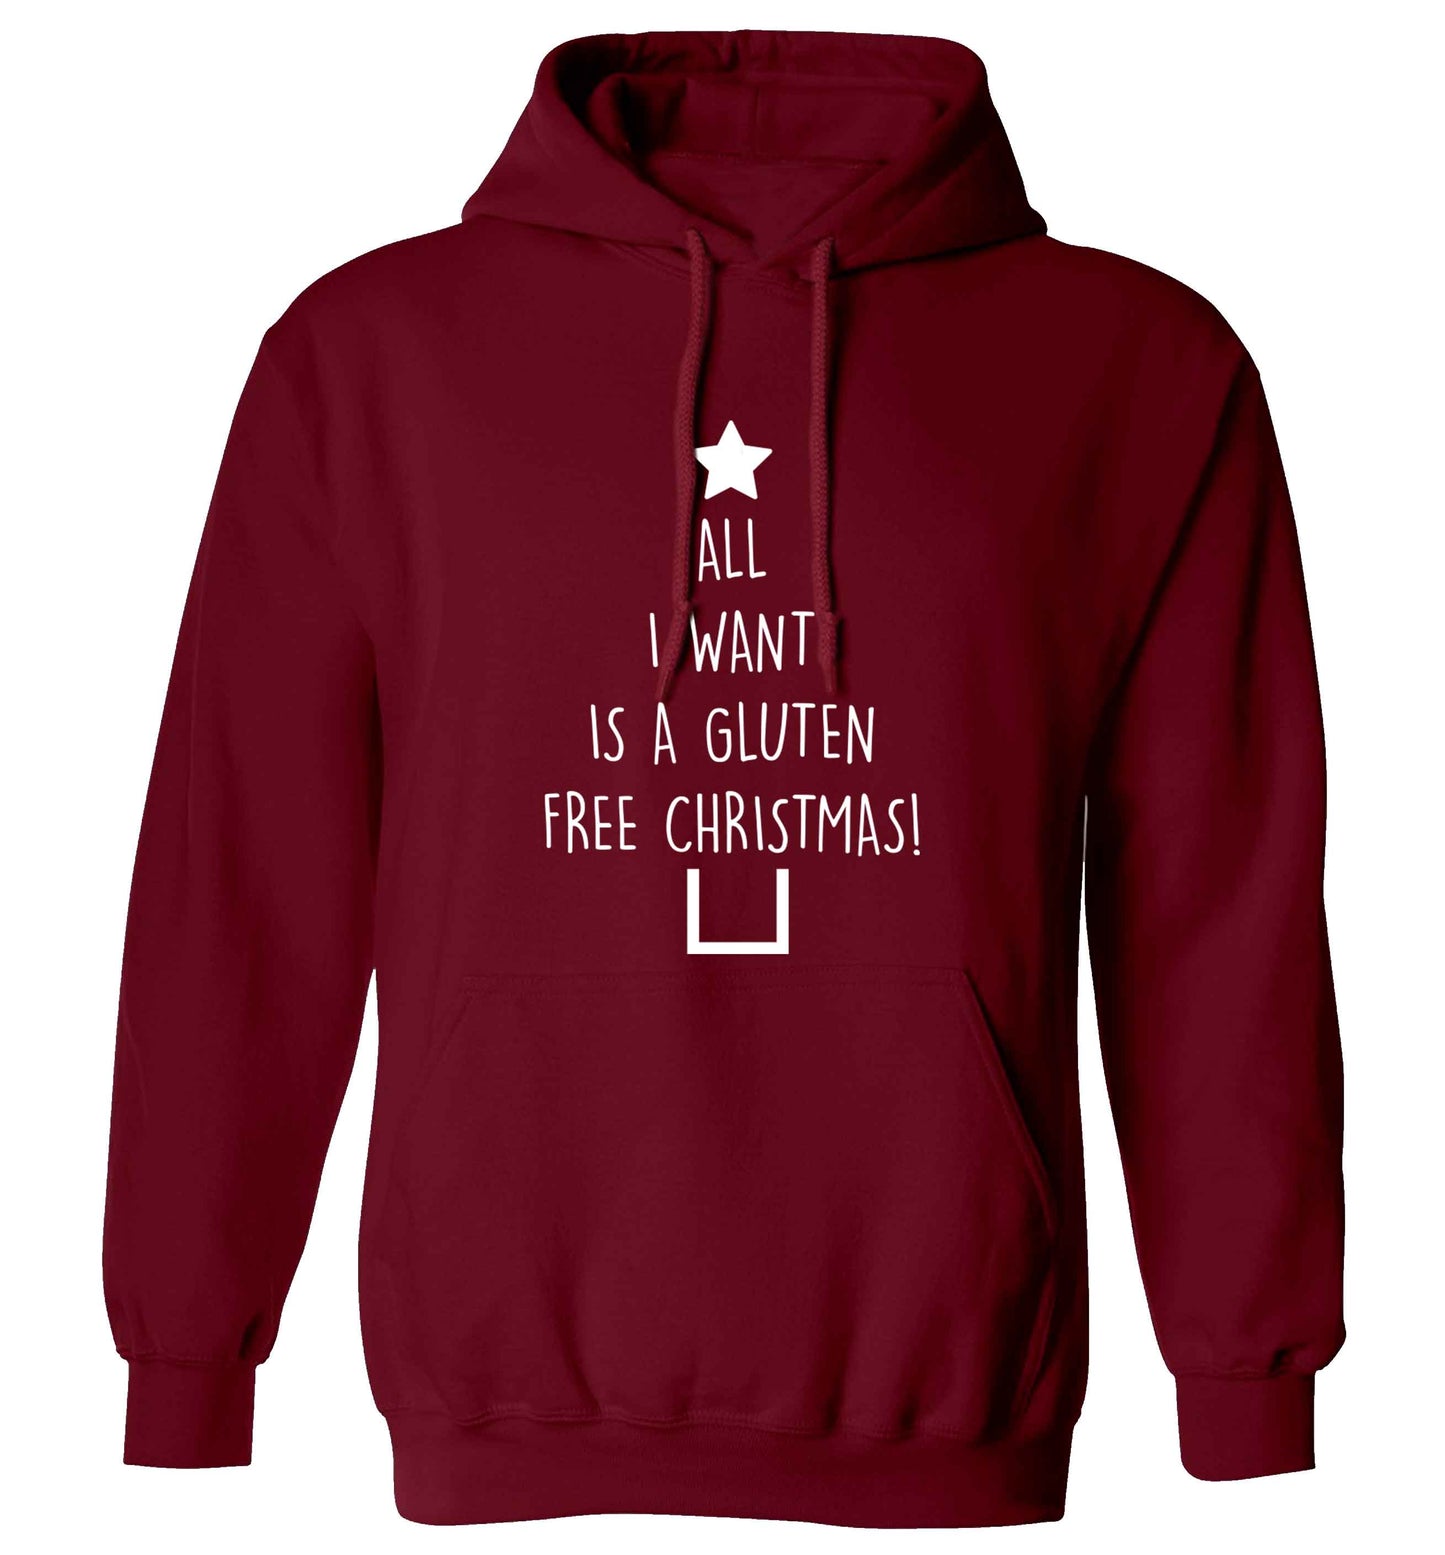 All I want is a gluten free Christmas adults unisex maroon hoodie 2XL